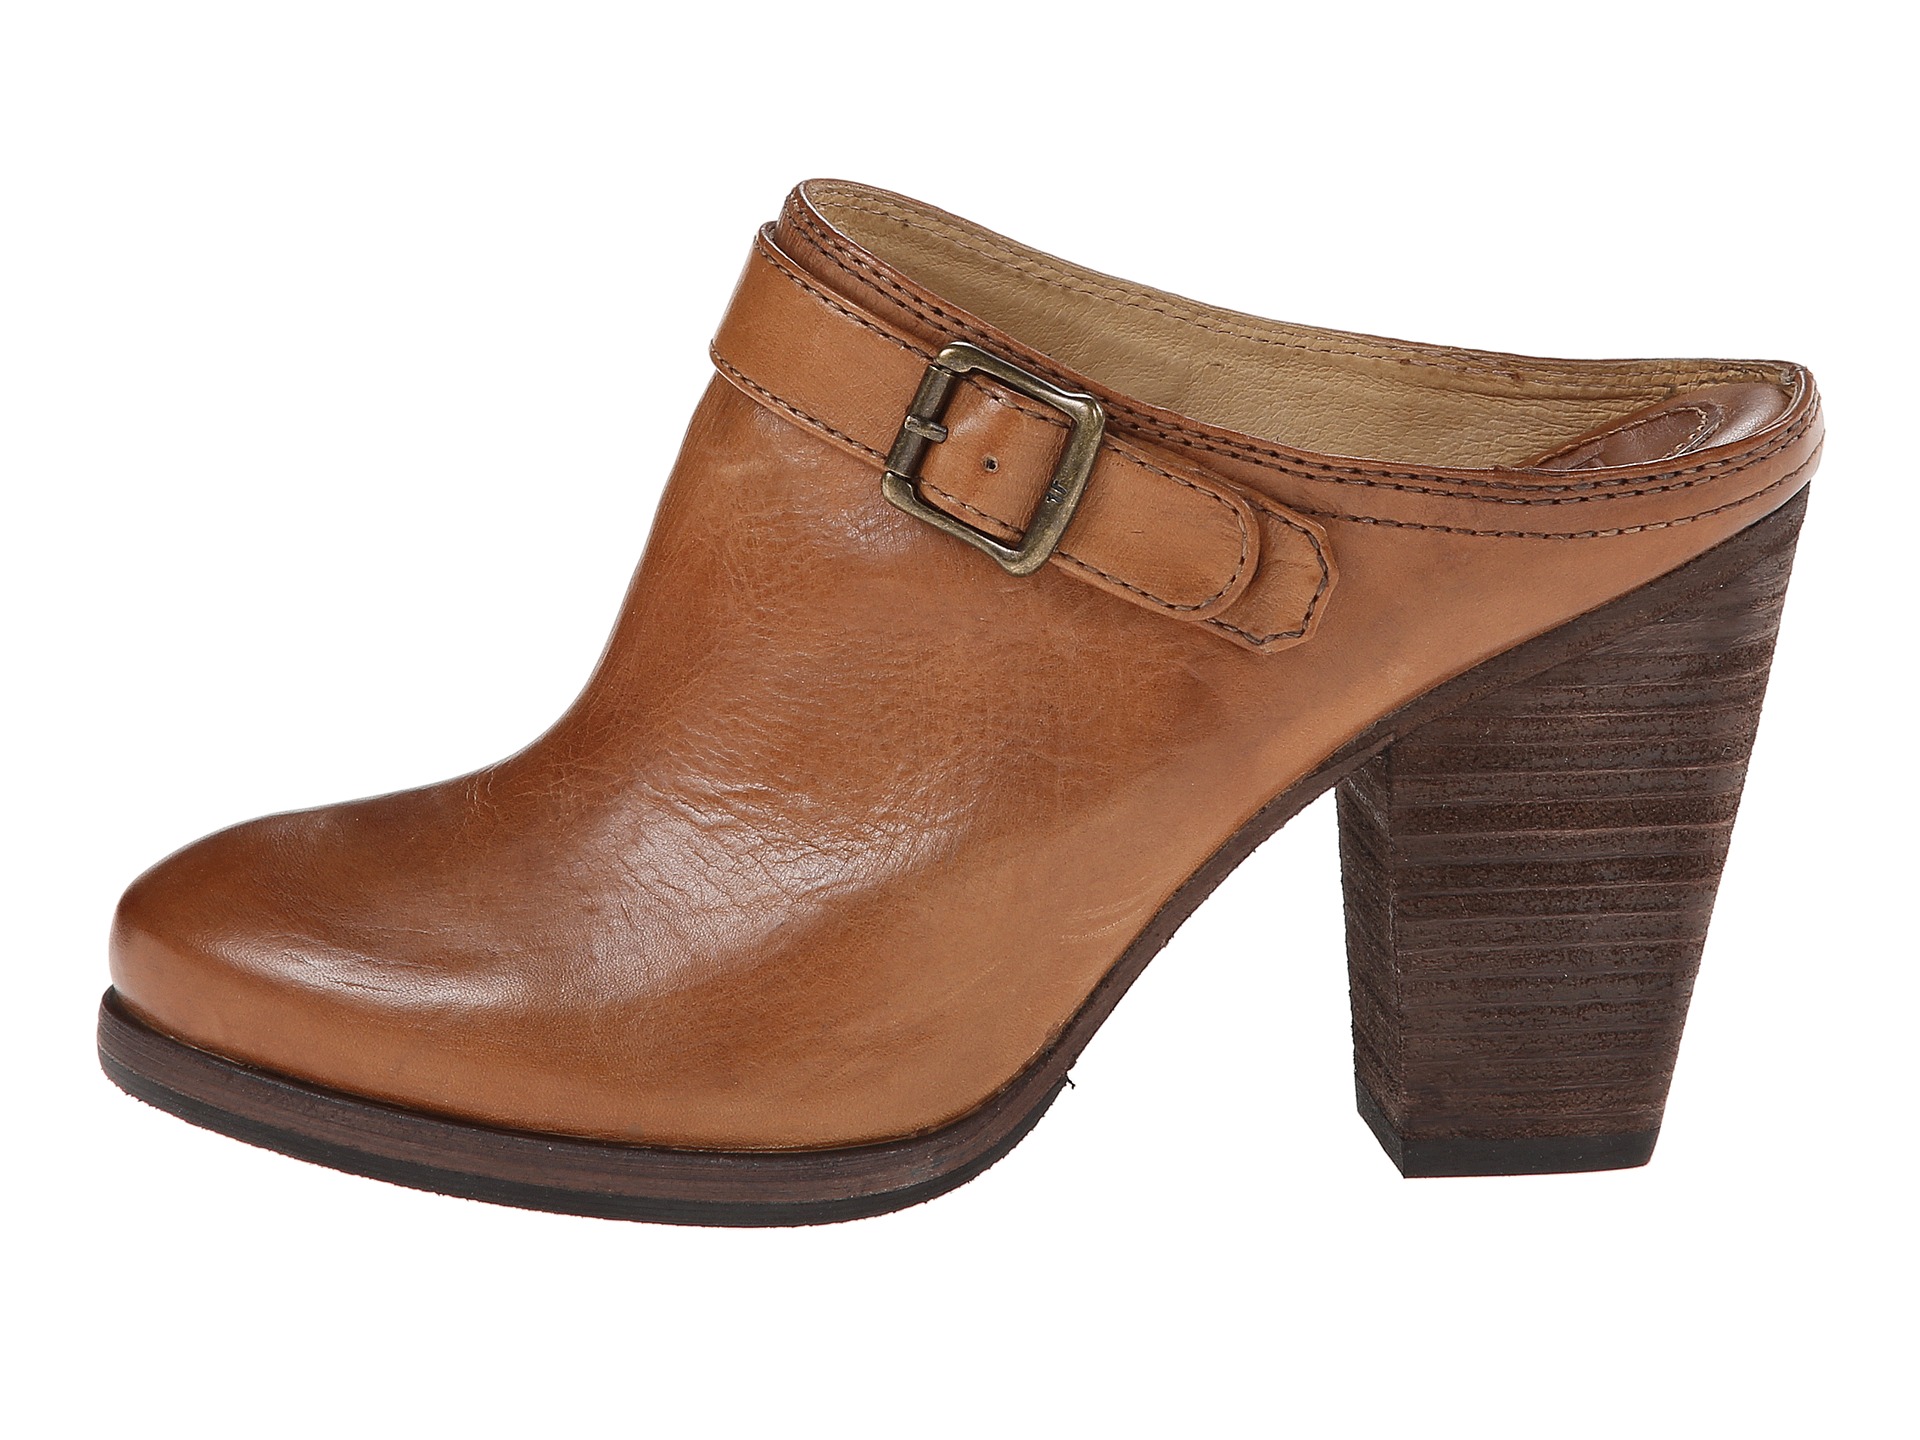 No results for frye patty slingback clog - Search Zappos